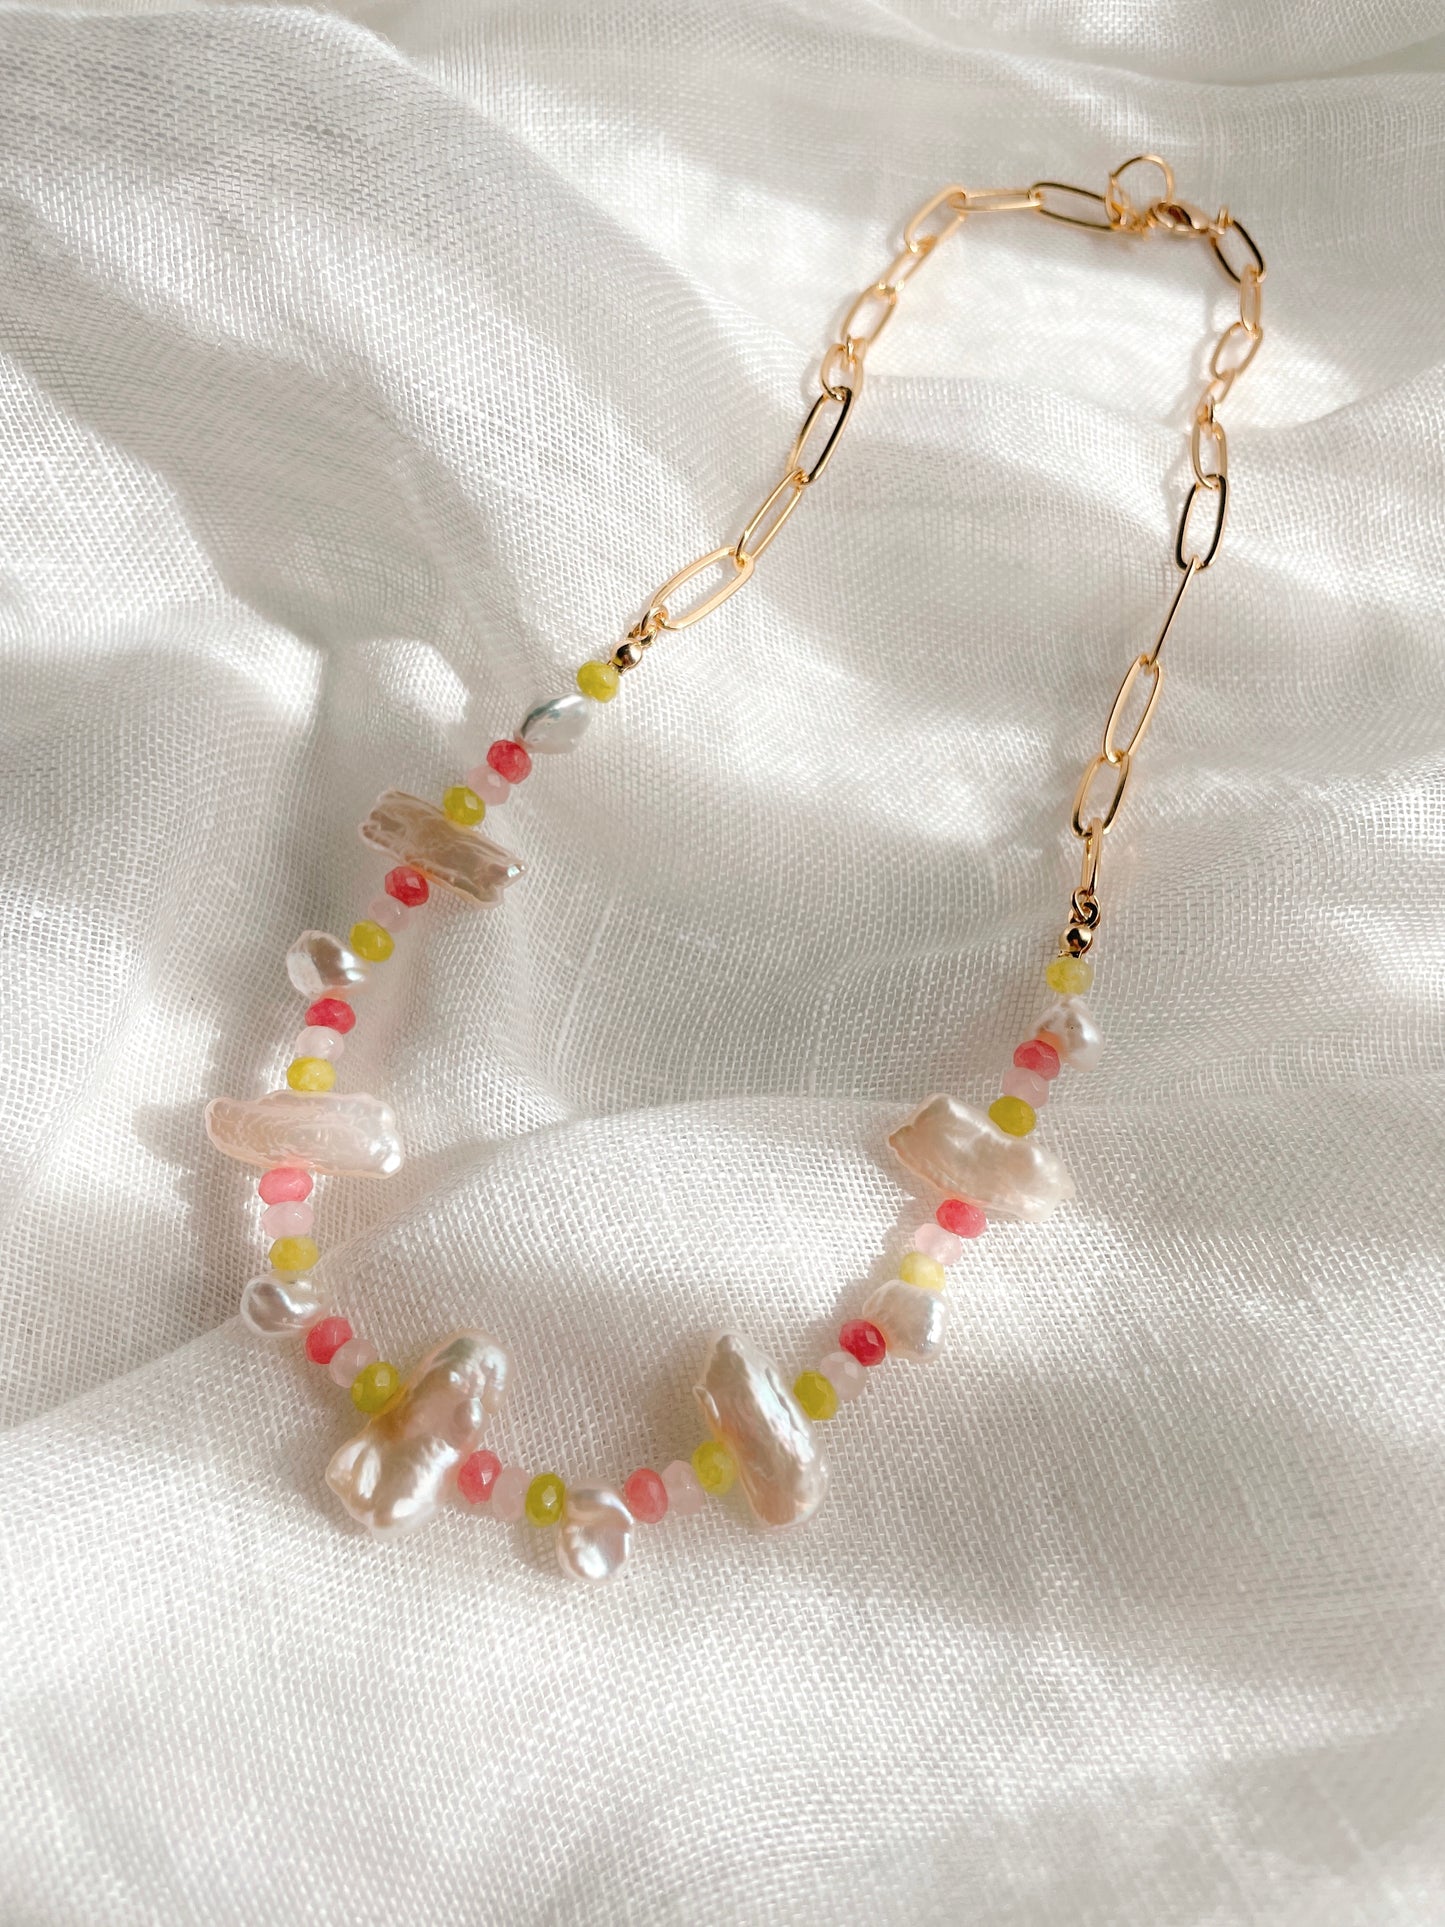 SUKI necklace - pearls and glass beads necklace